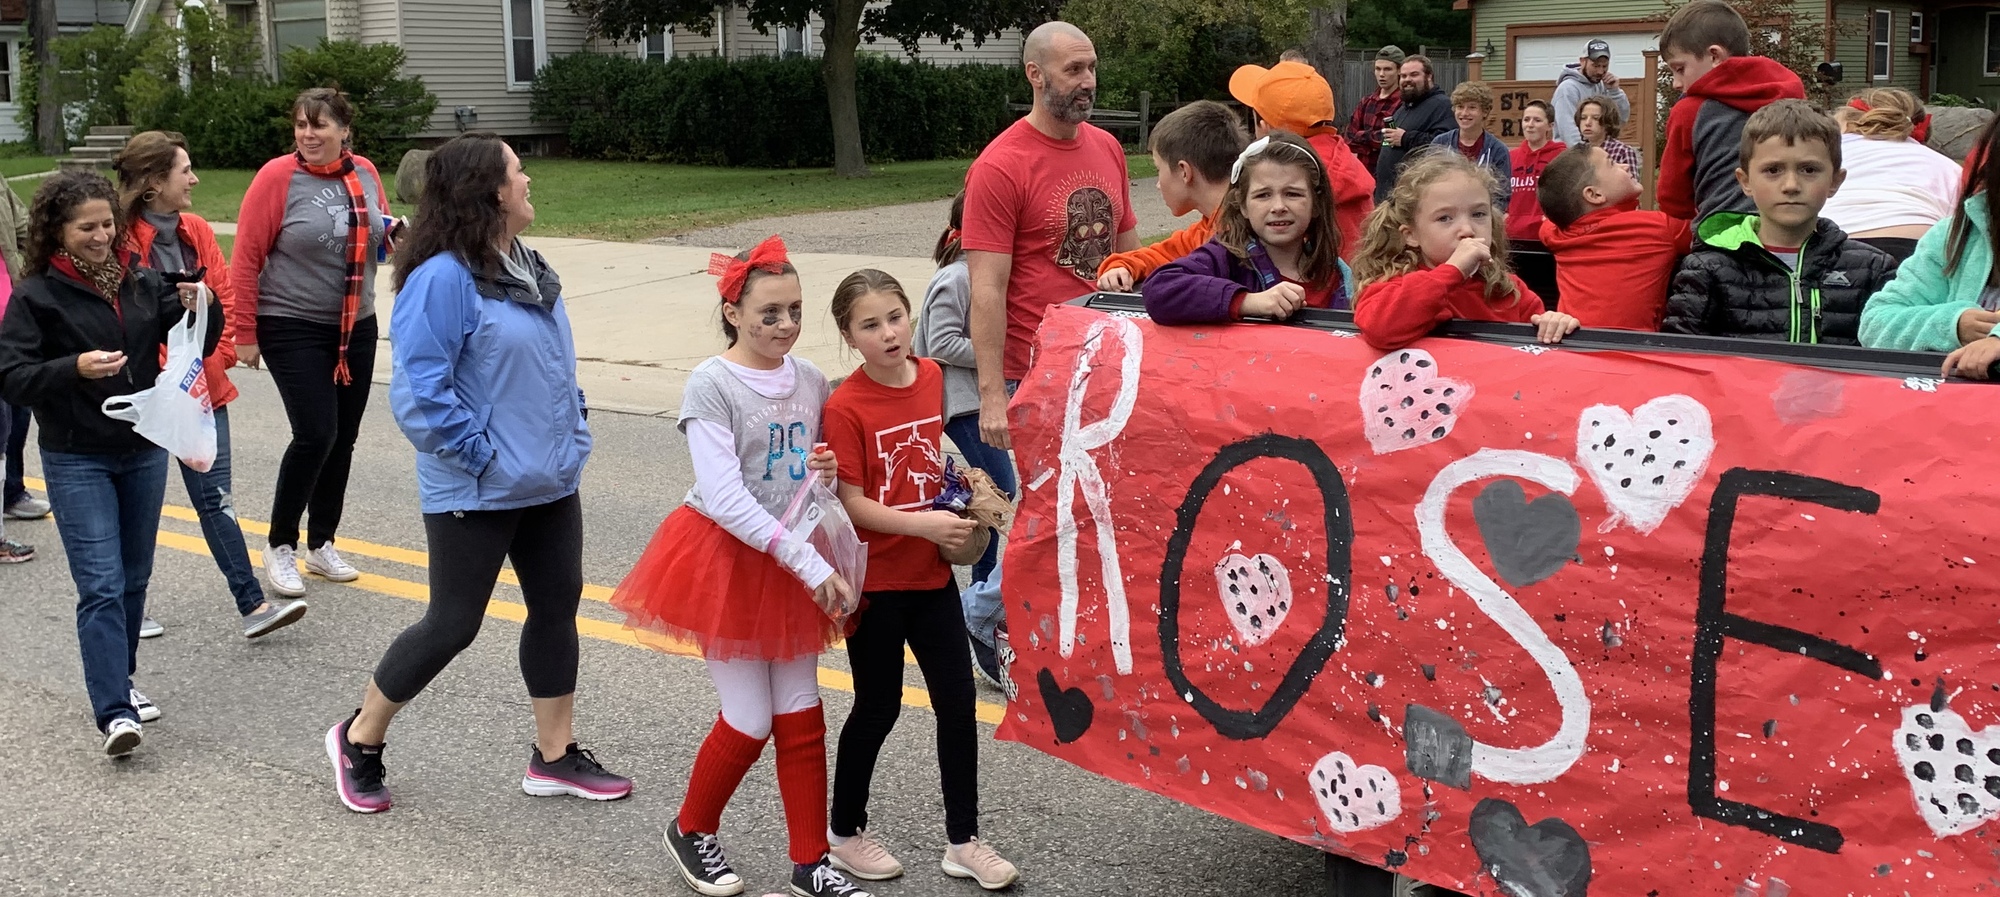 Rose Pioneer staff and students in the homecoming parade